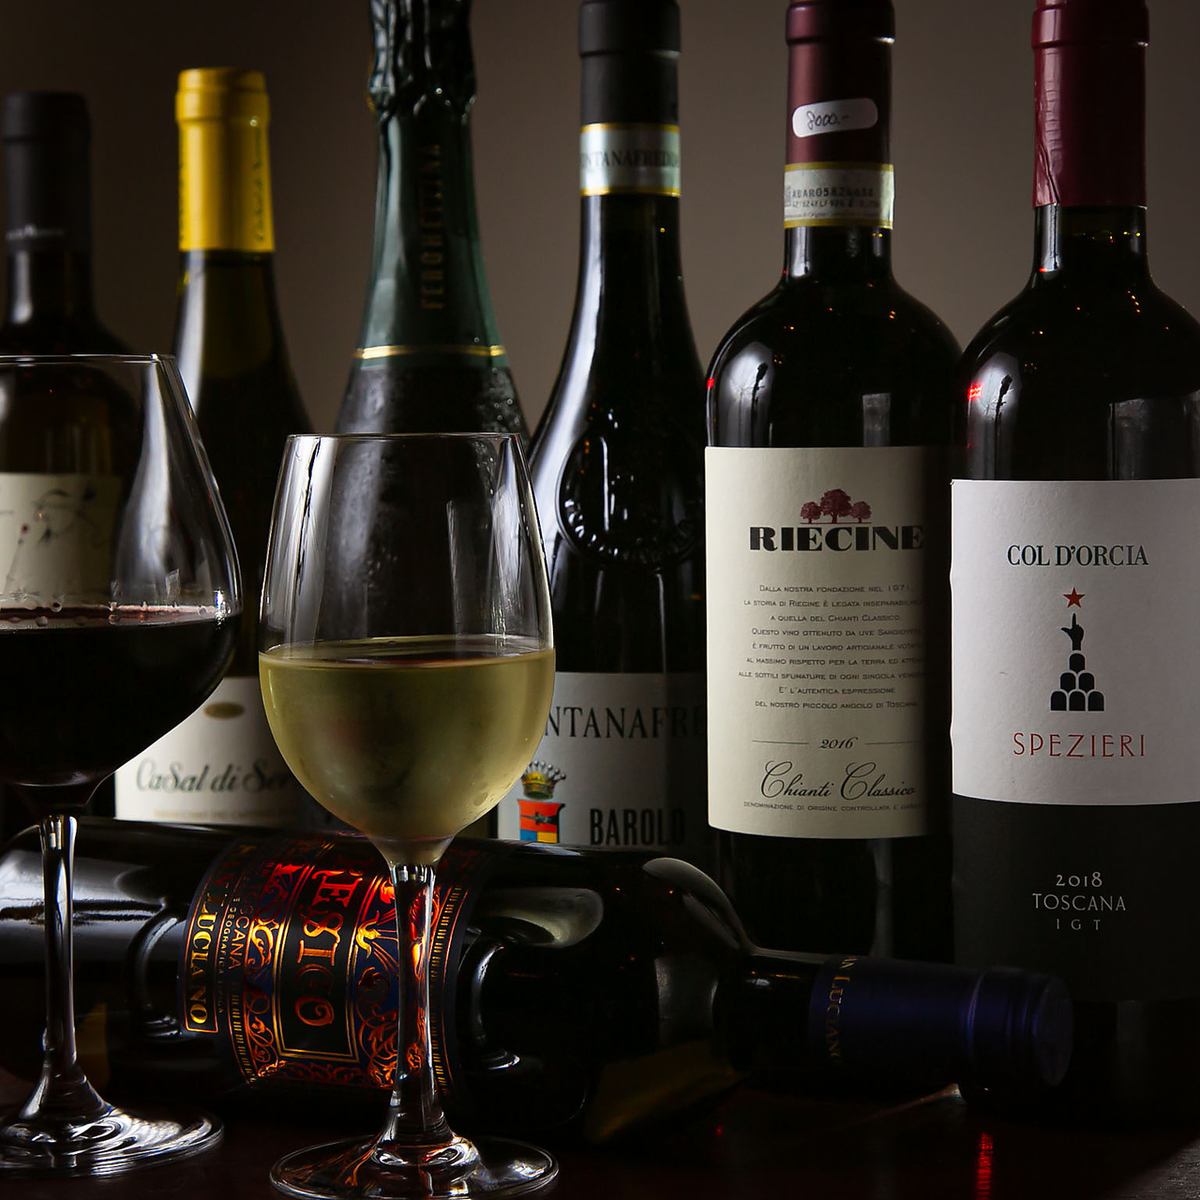 The only wine is Italian wine, mainly in central Tuscany.